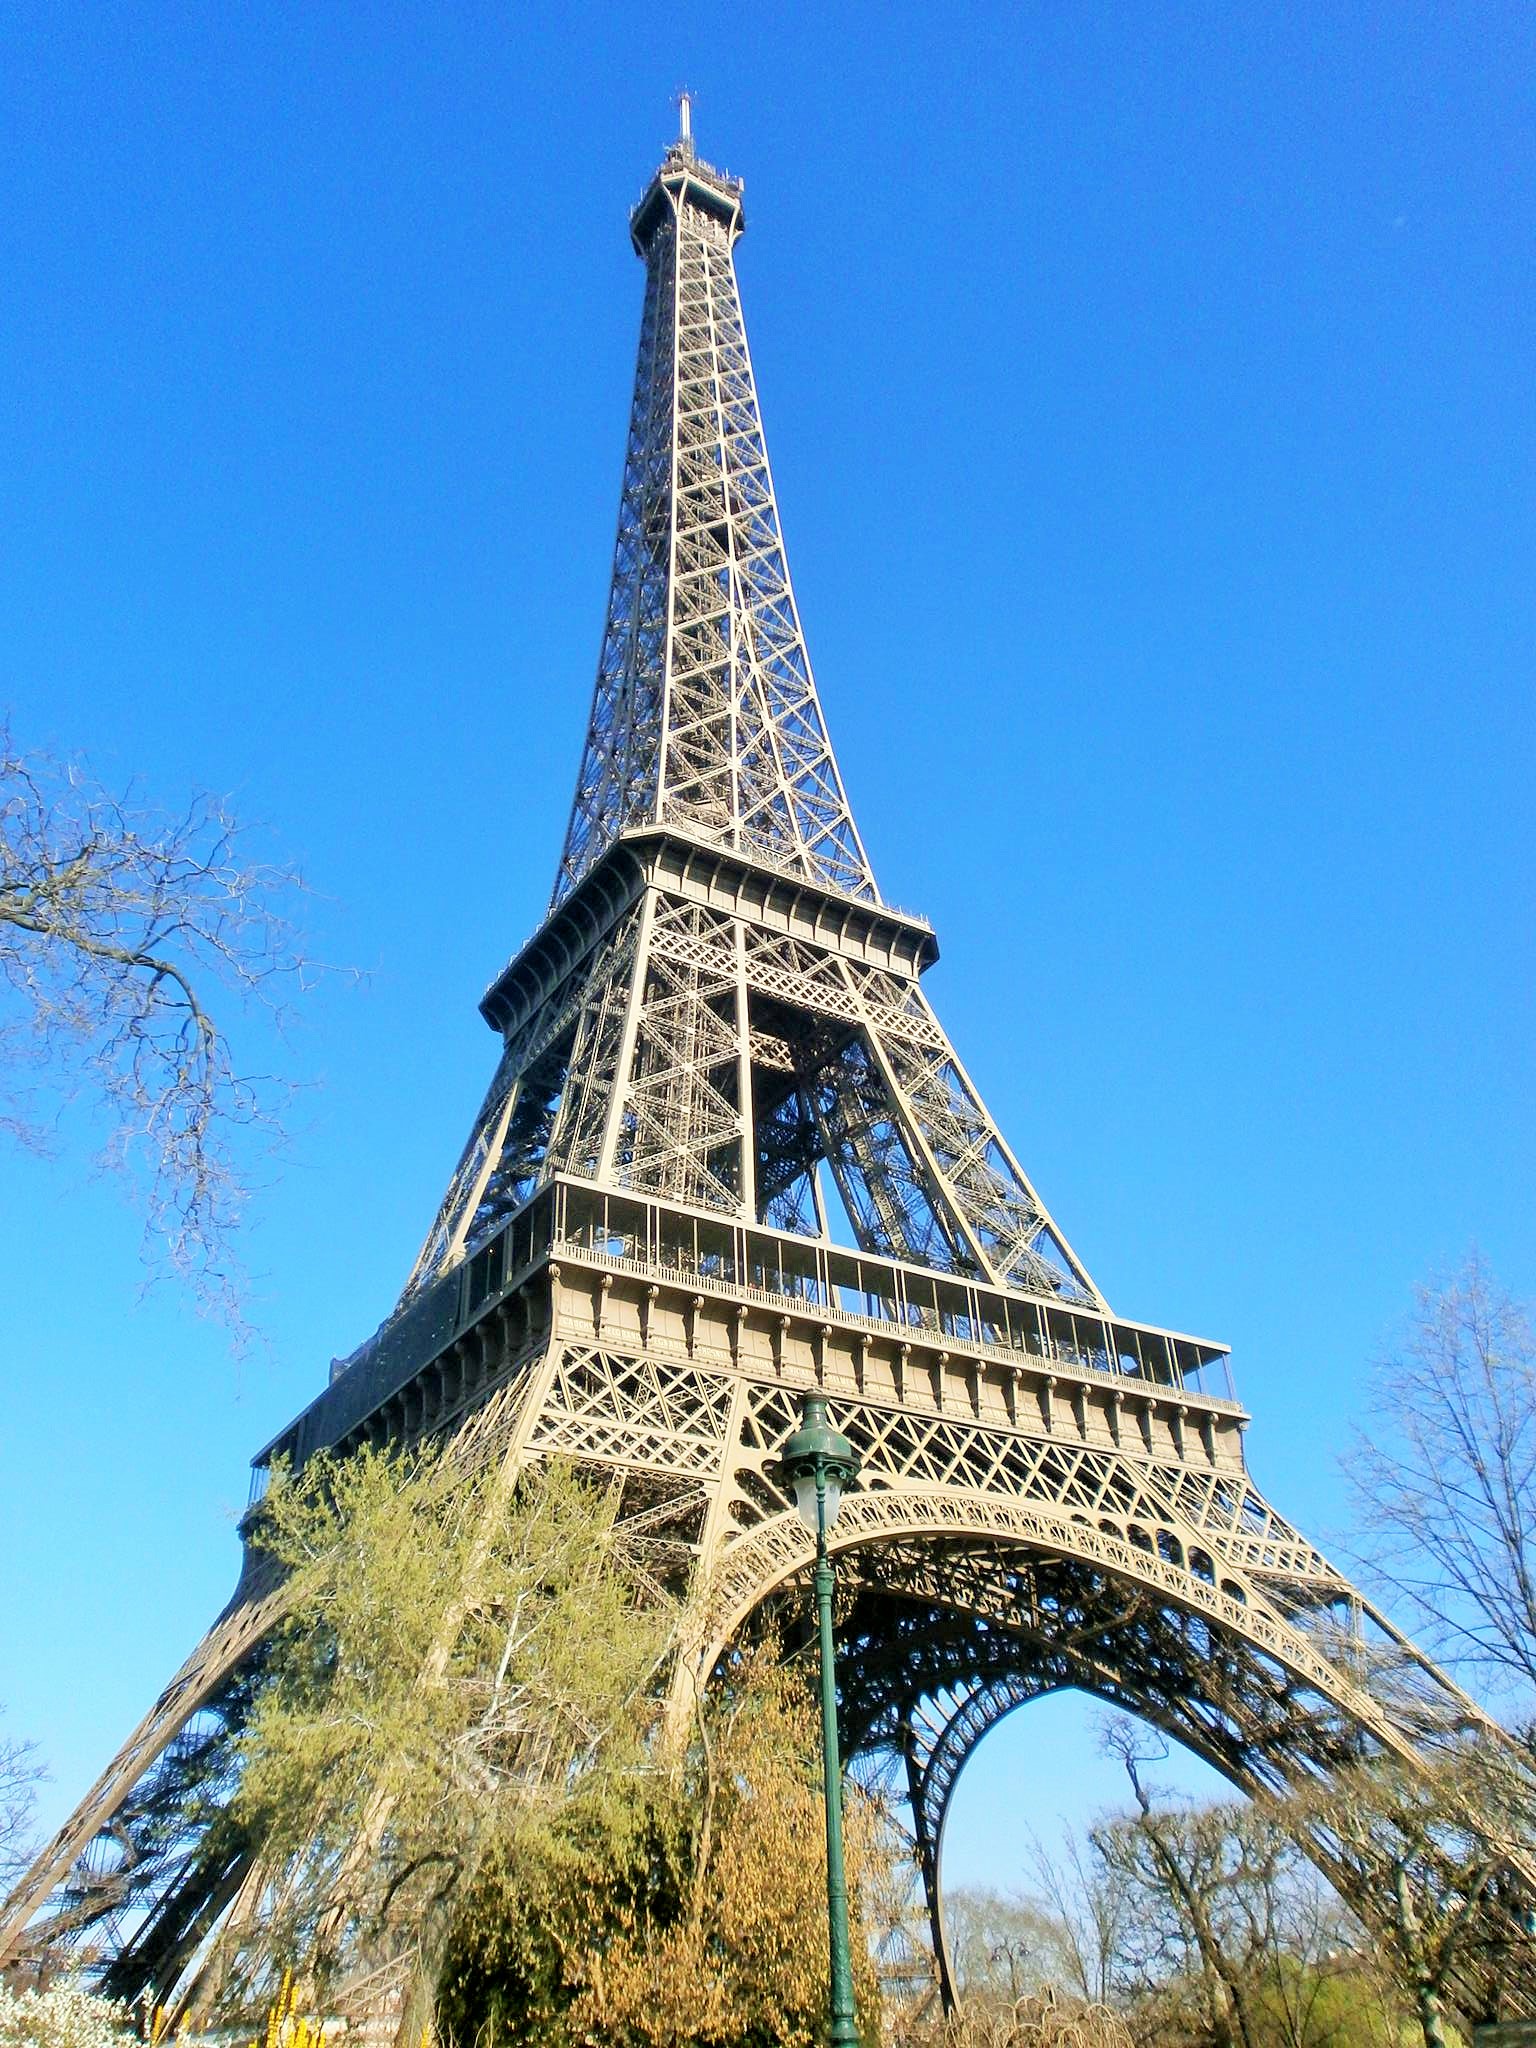 3.7. FRANCE'S BID TO RECAPTURE THE TALLEST BUILDING RECORD: EIFFEL'S  300-METER TOWER – The Architecture Professor